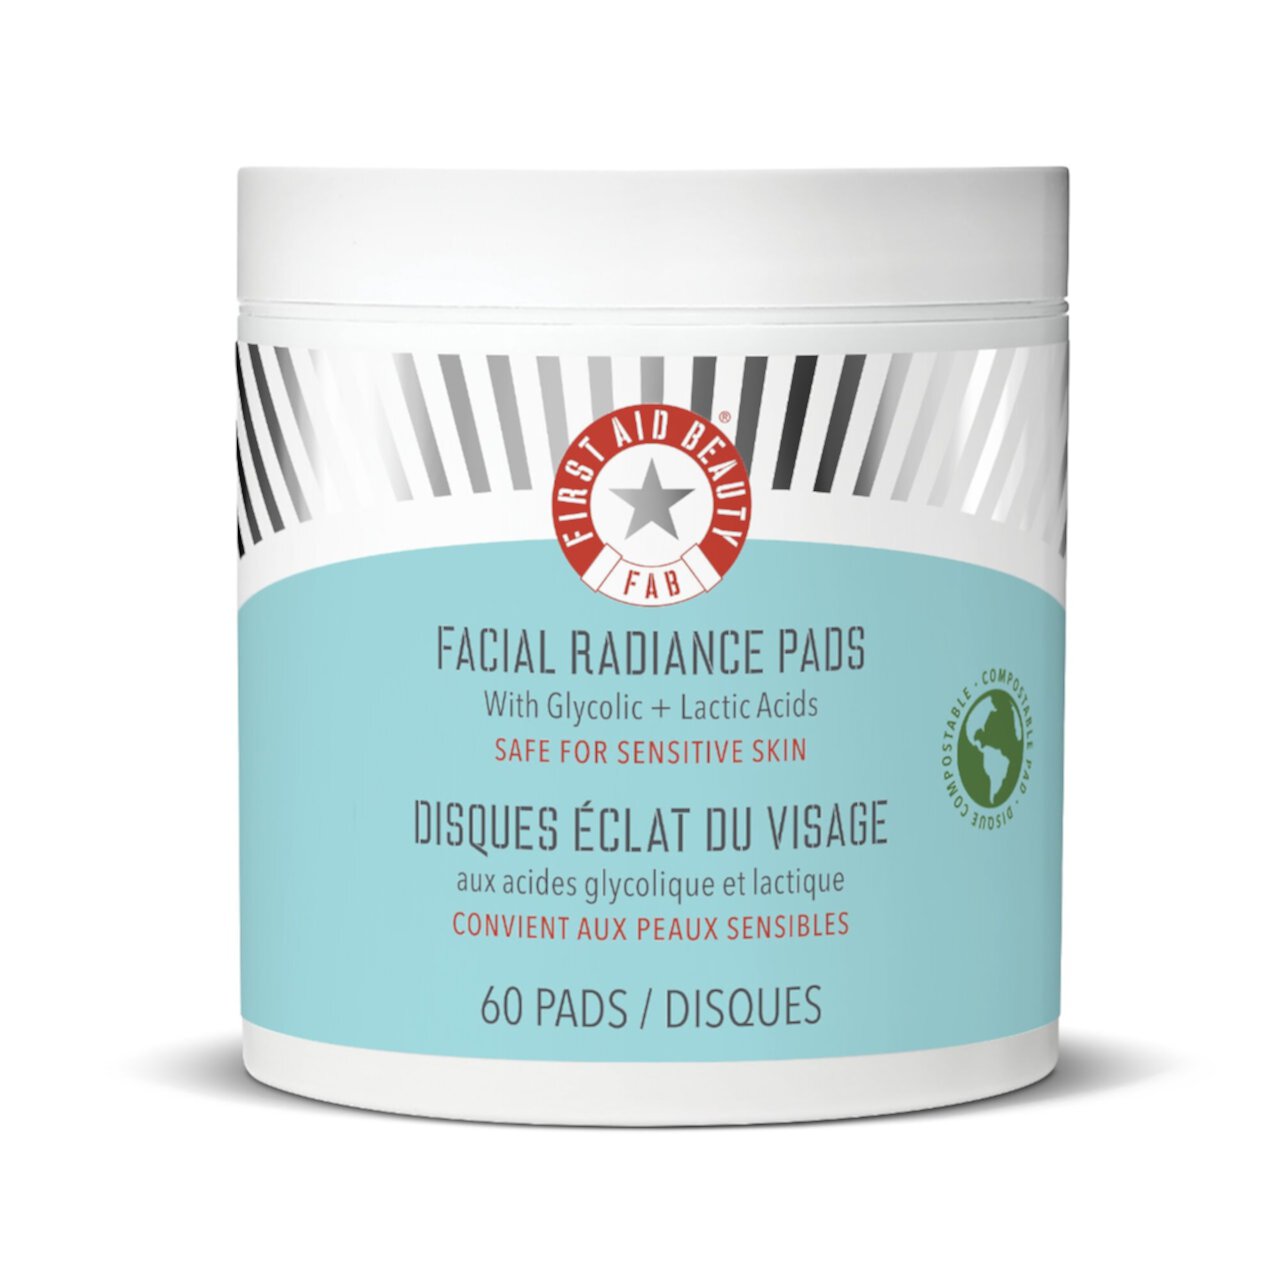 Facial Radiance Pads with Glycolic + Lactic Acids  First Aid Beauty